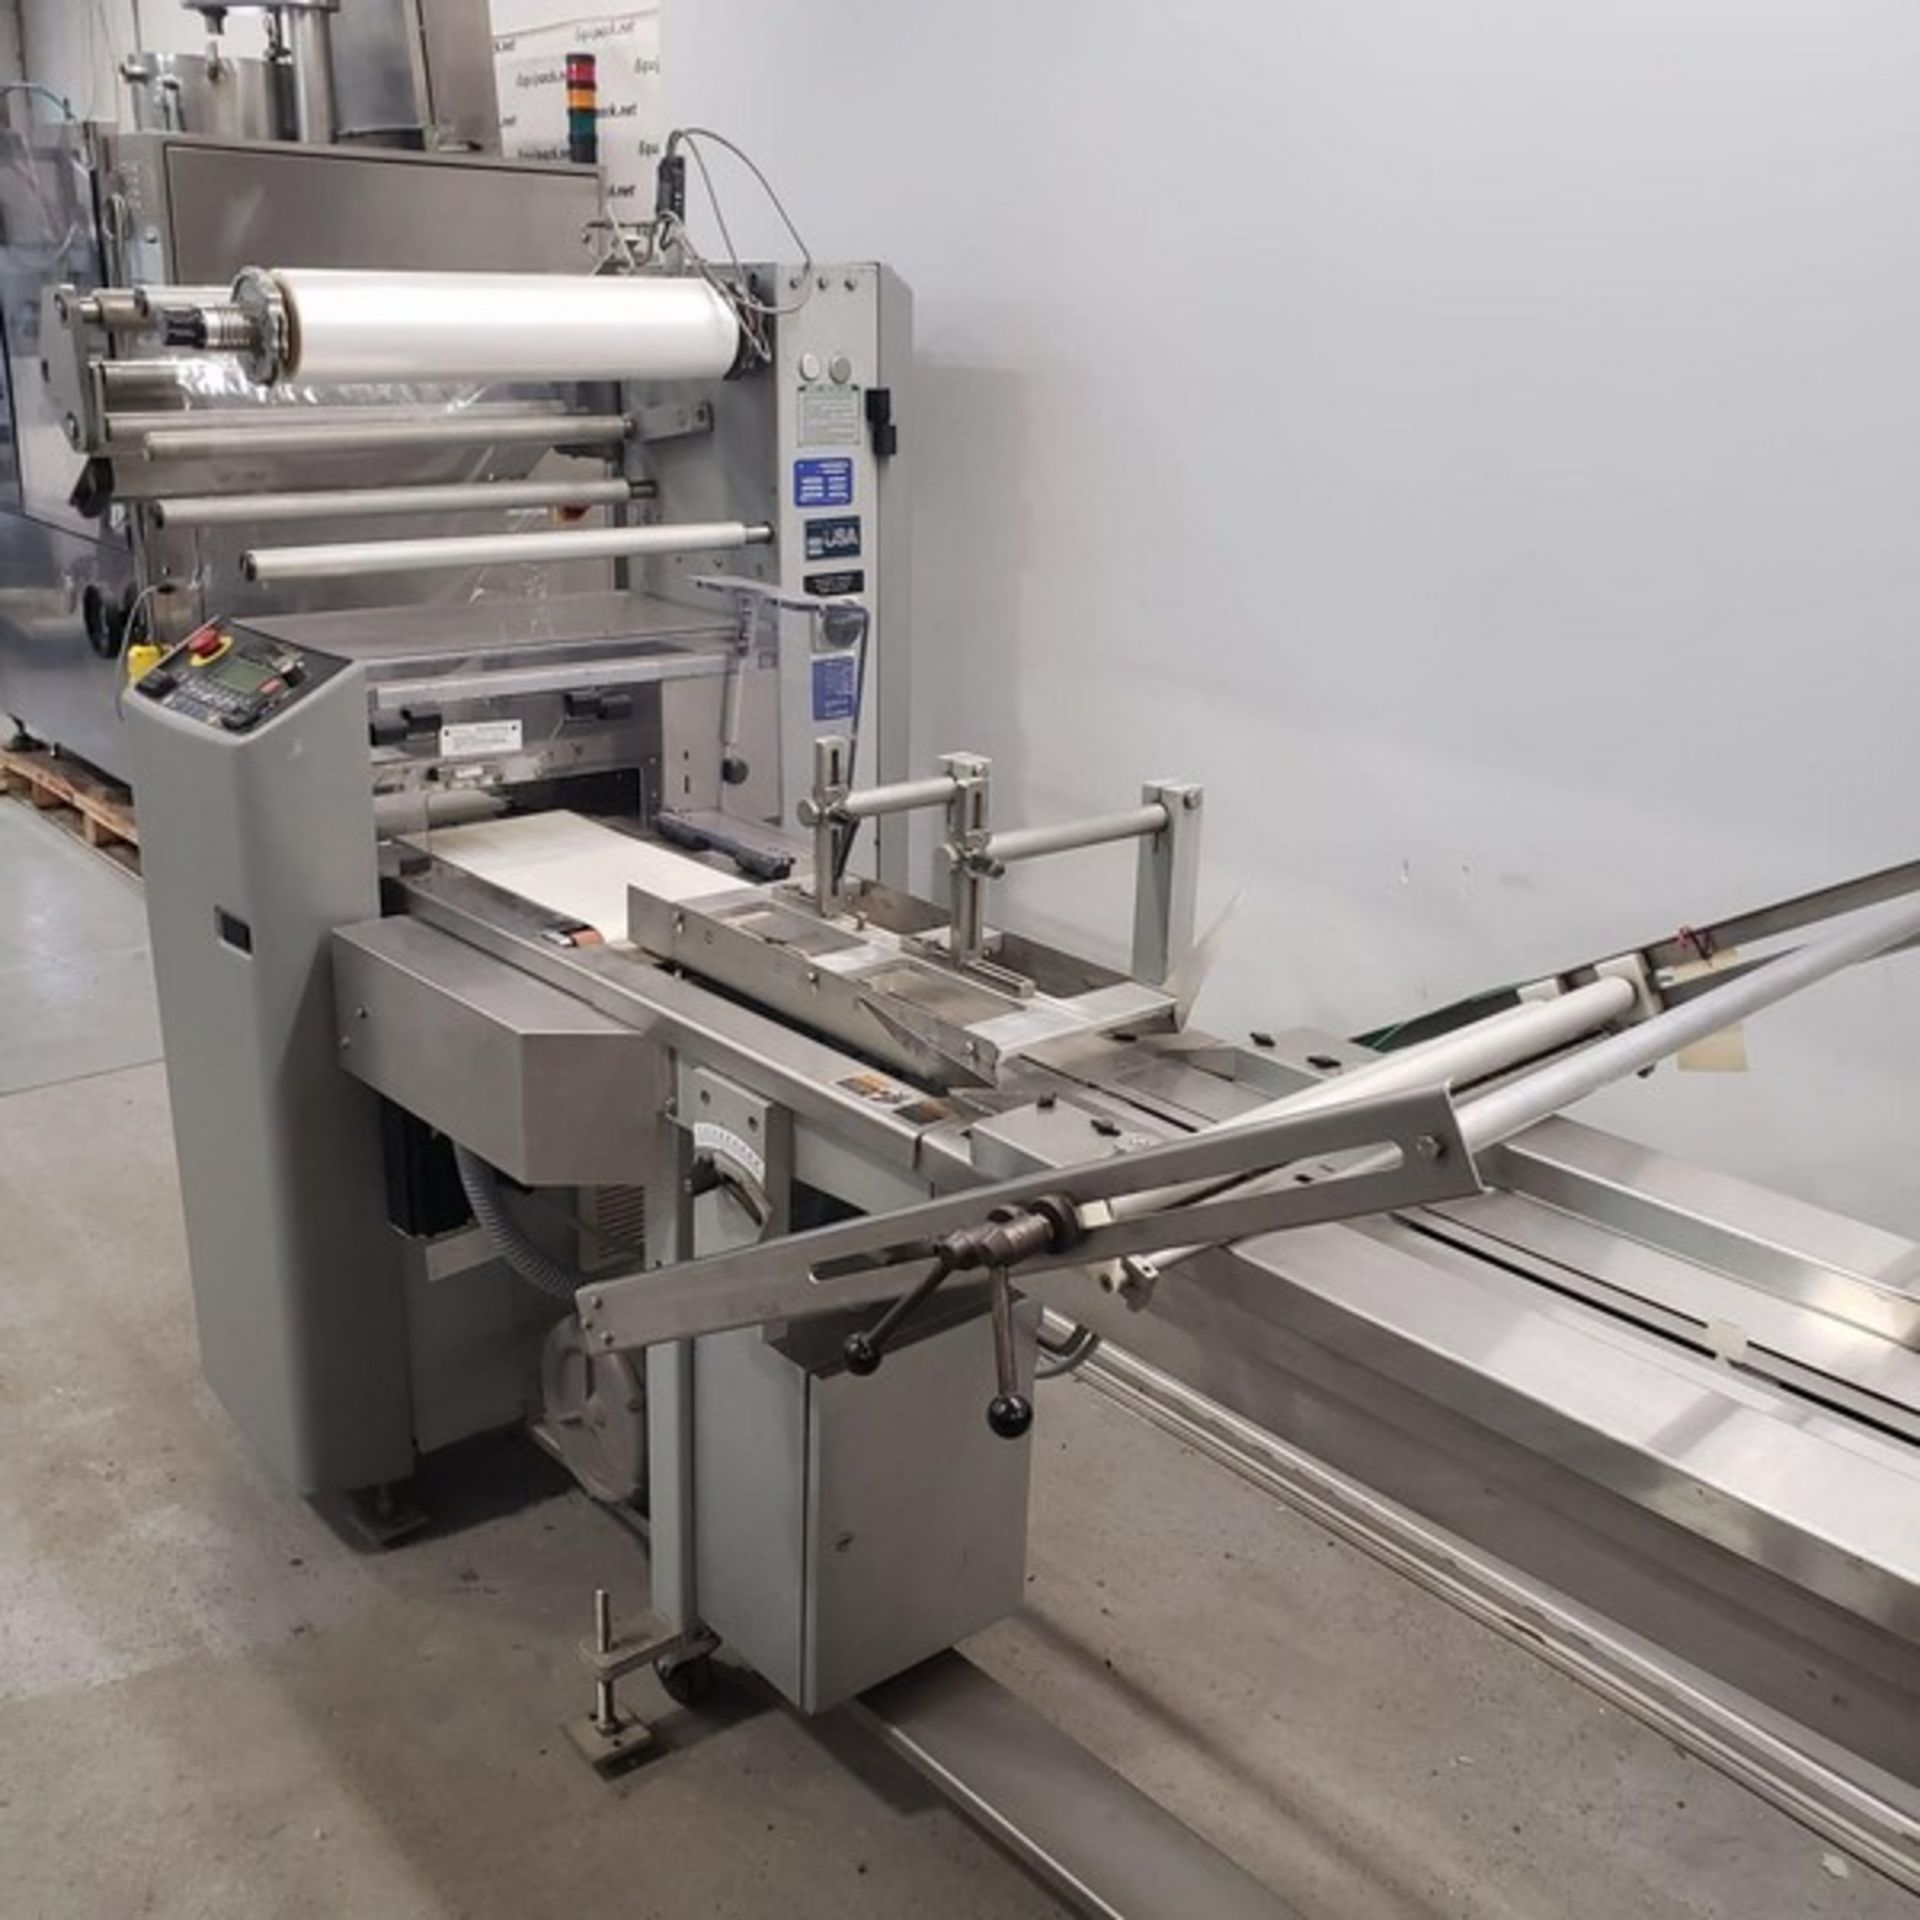 Doboy Model Stratus Horizontal Flow Wrapper, food and cosmetical grade, up to 50 packages per minute - Image 3 of 7